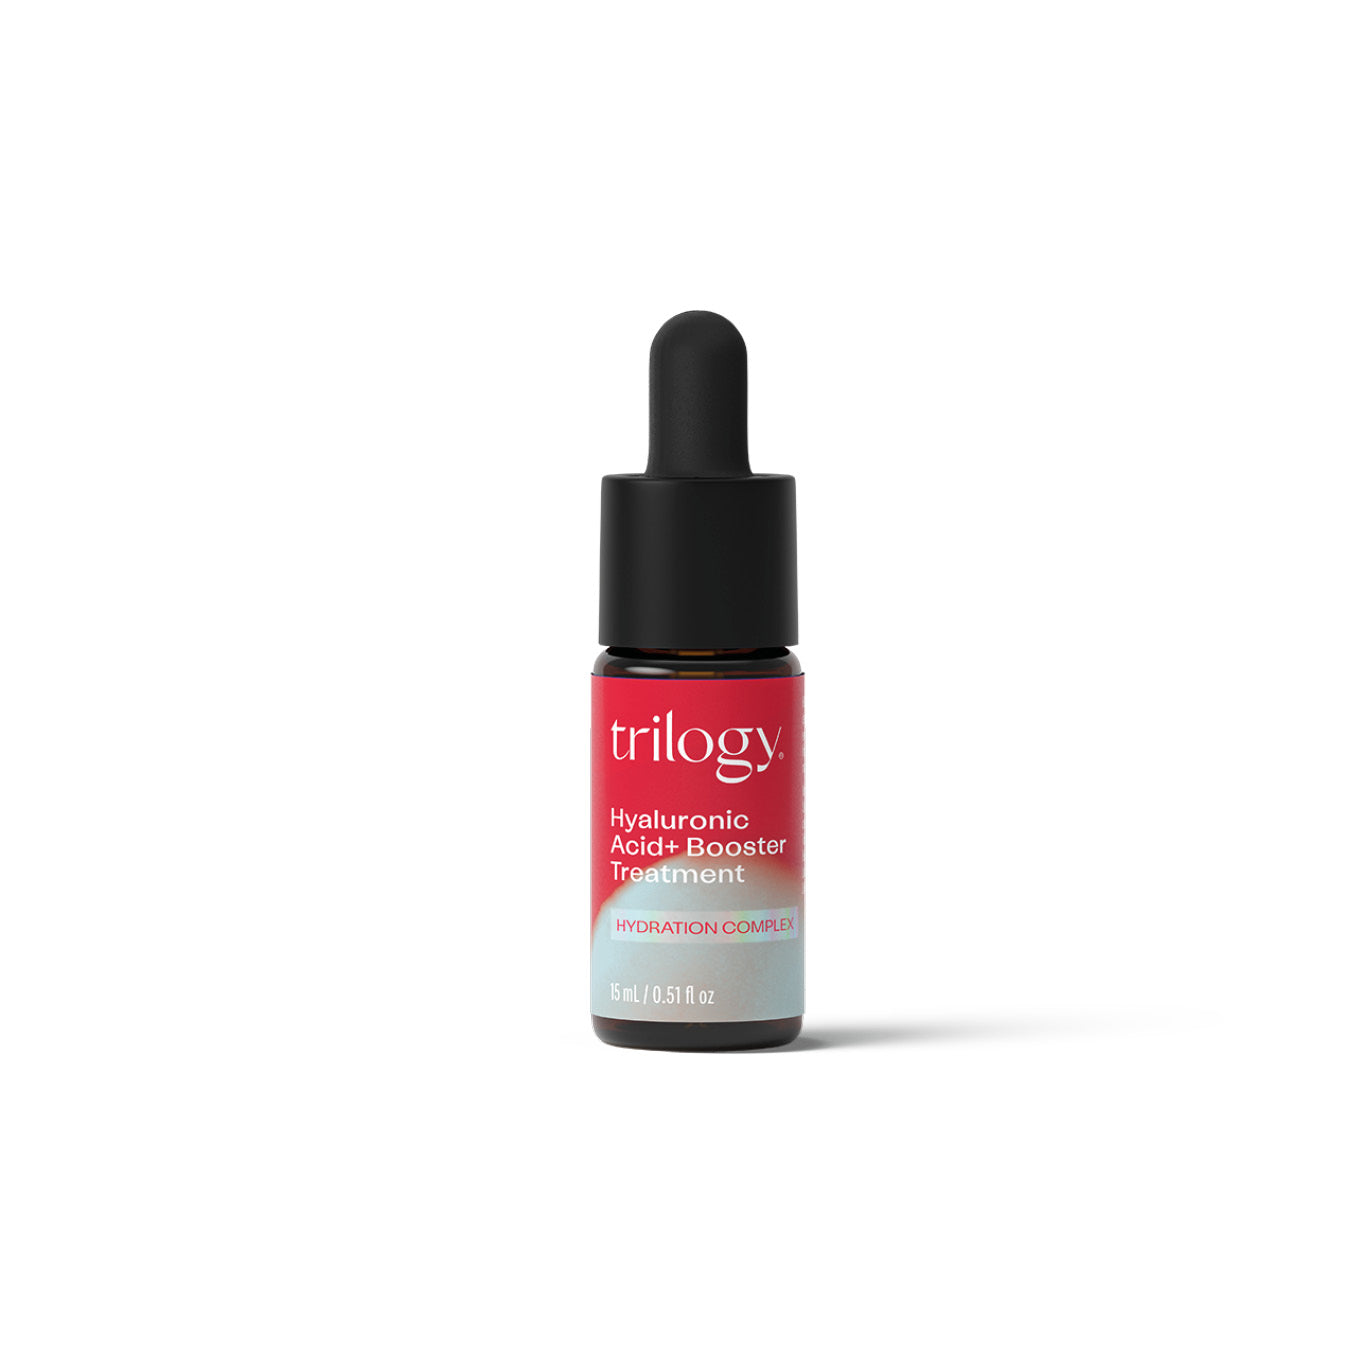 Trilogy Hyaluronic Acid+ booster